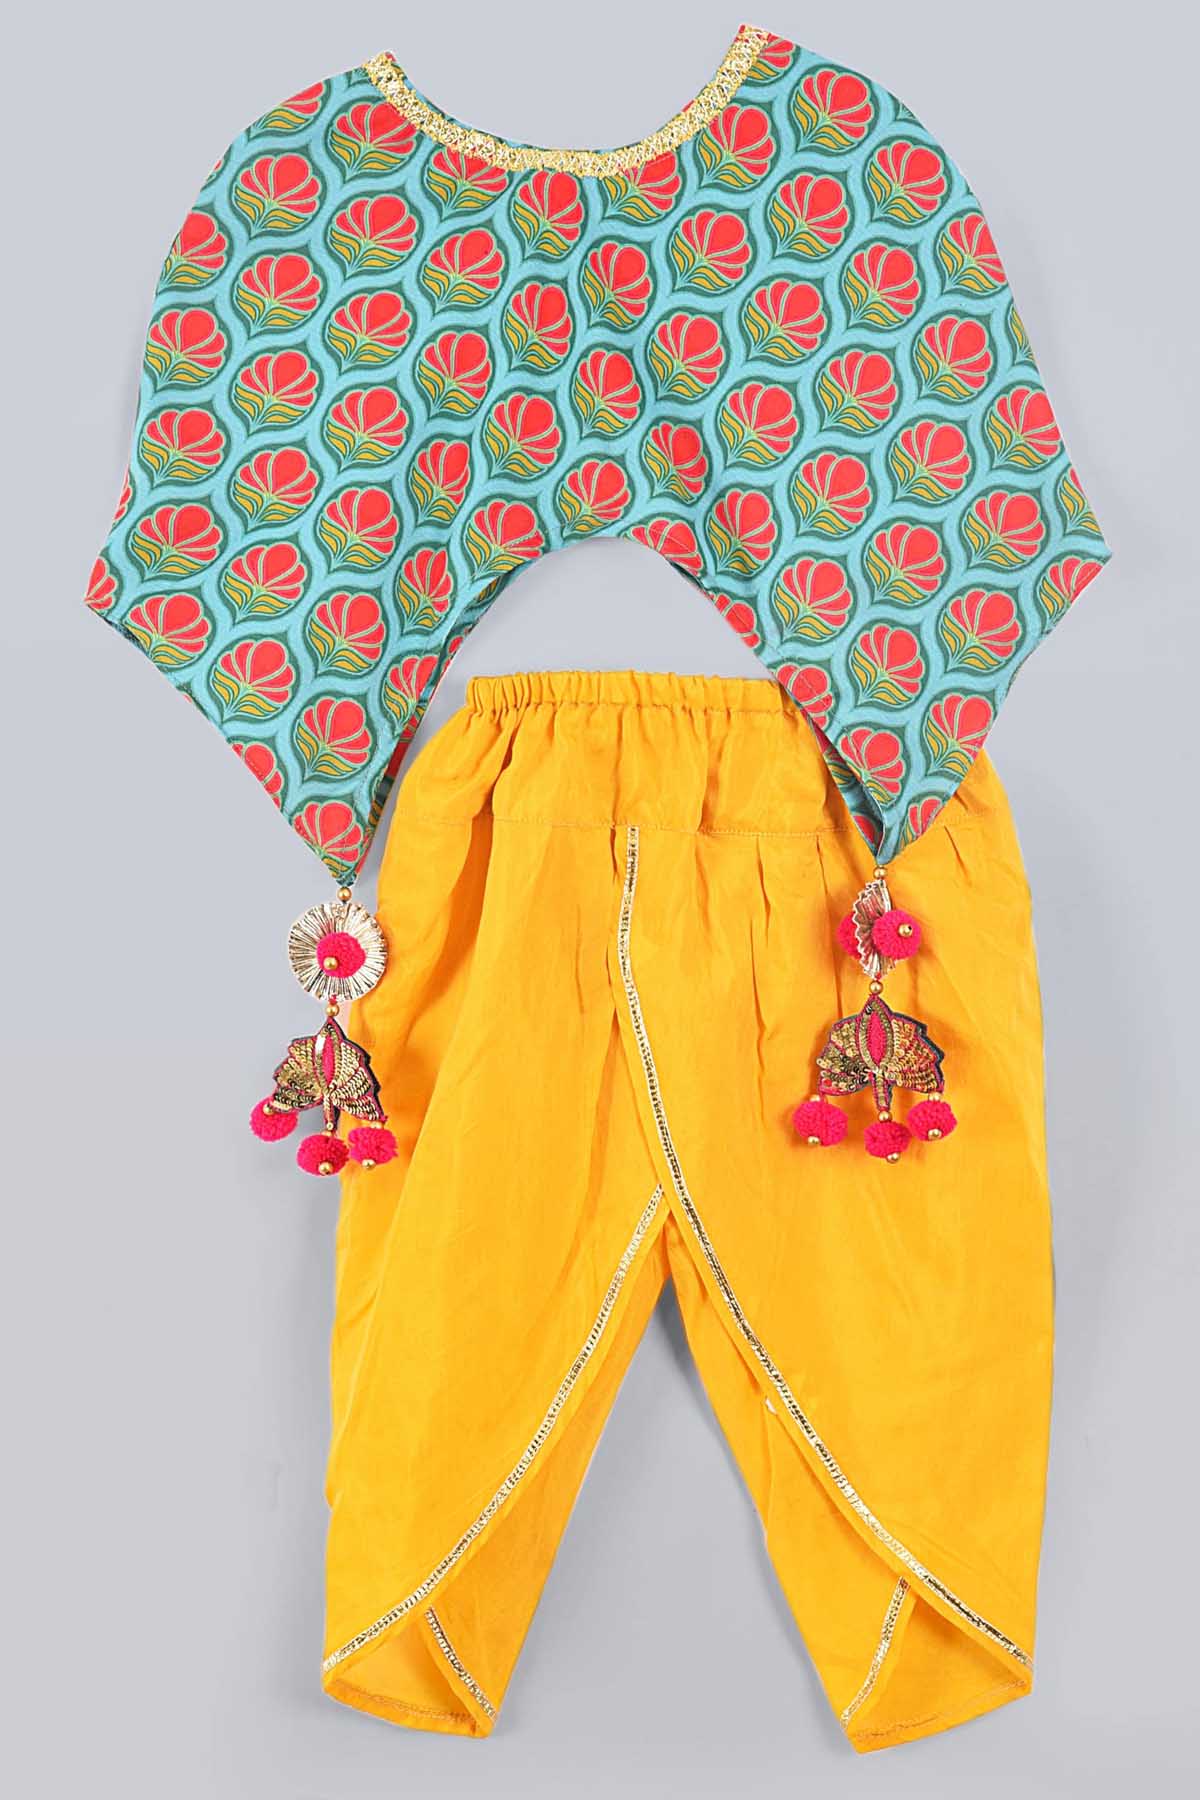 Designer Little Brats Stylish Poncho & Dhoti Set For Kids Available online at ScrollnShops